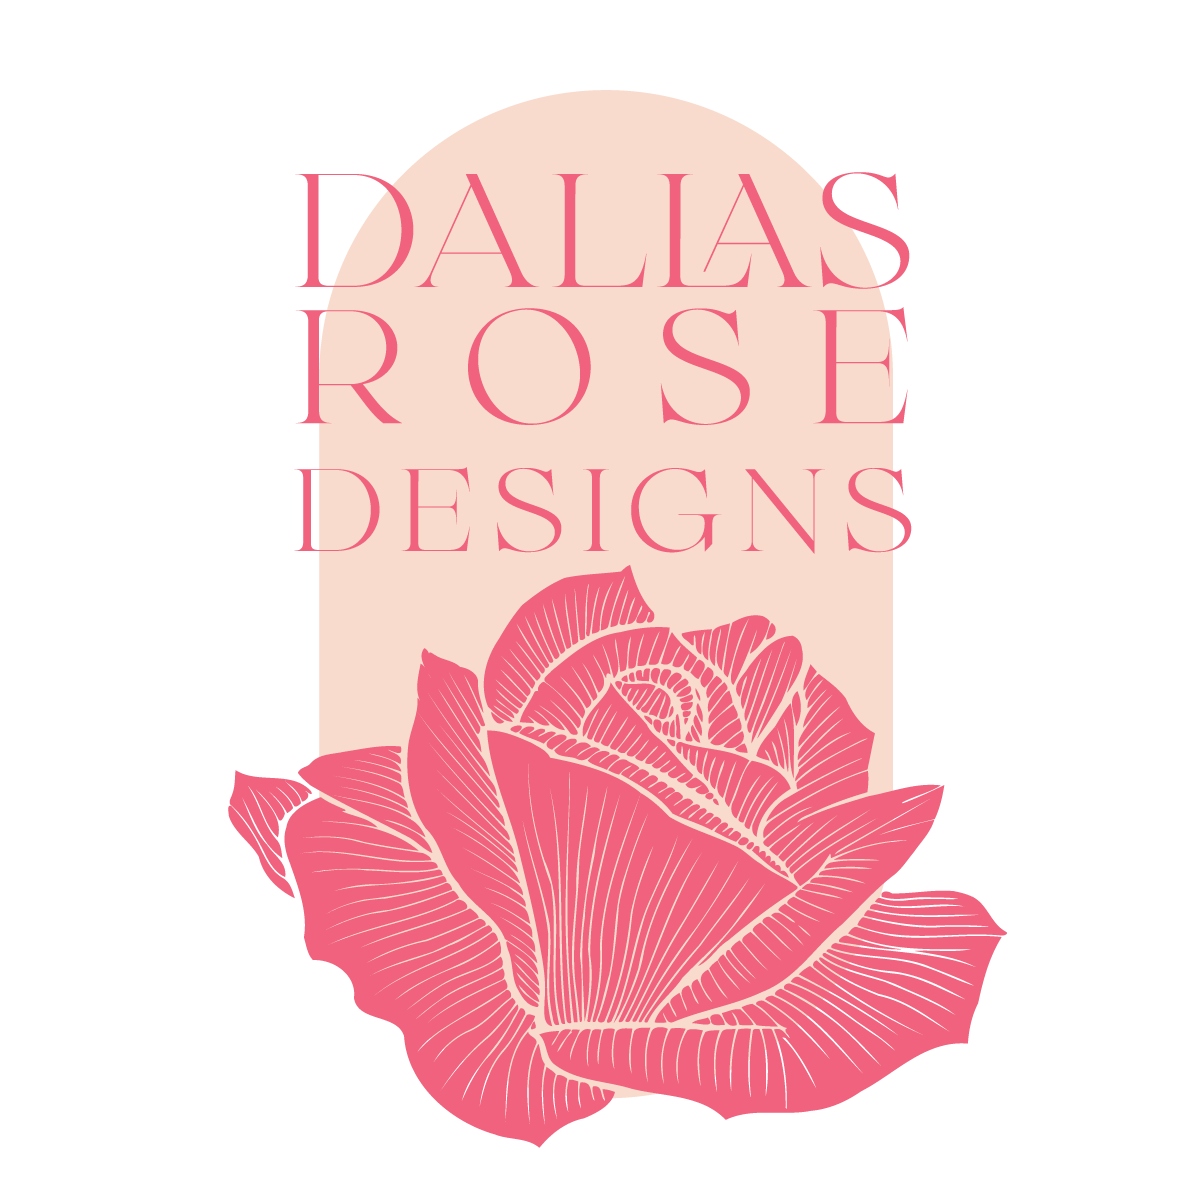 The logo for dallas rose designs has a pink rose on it.